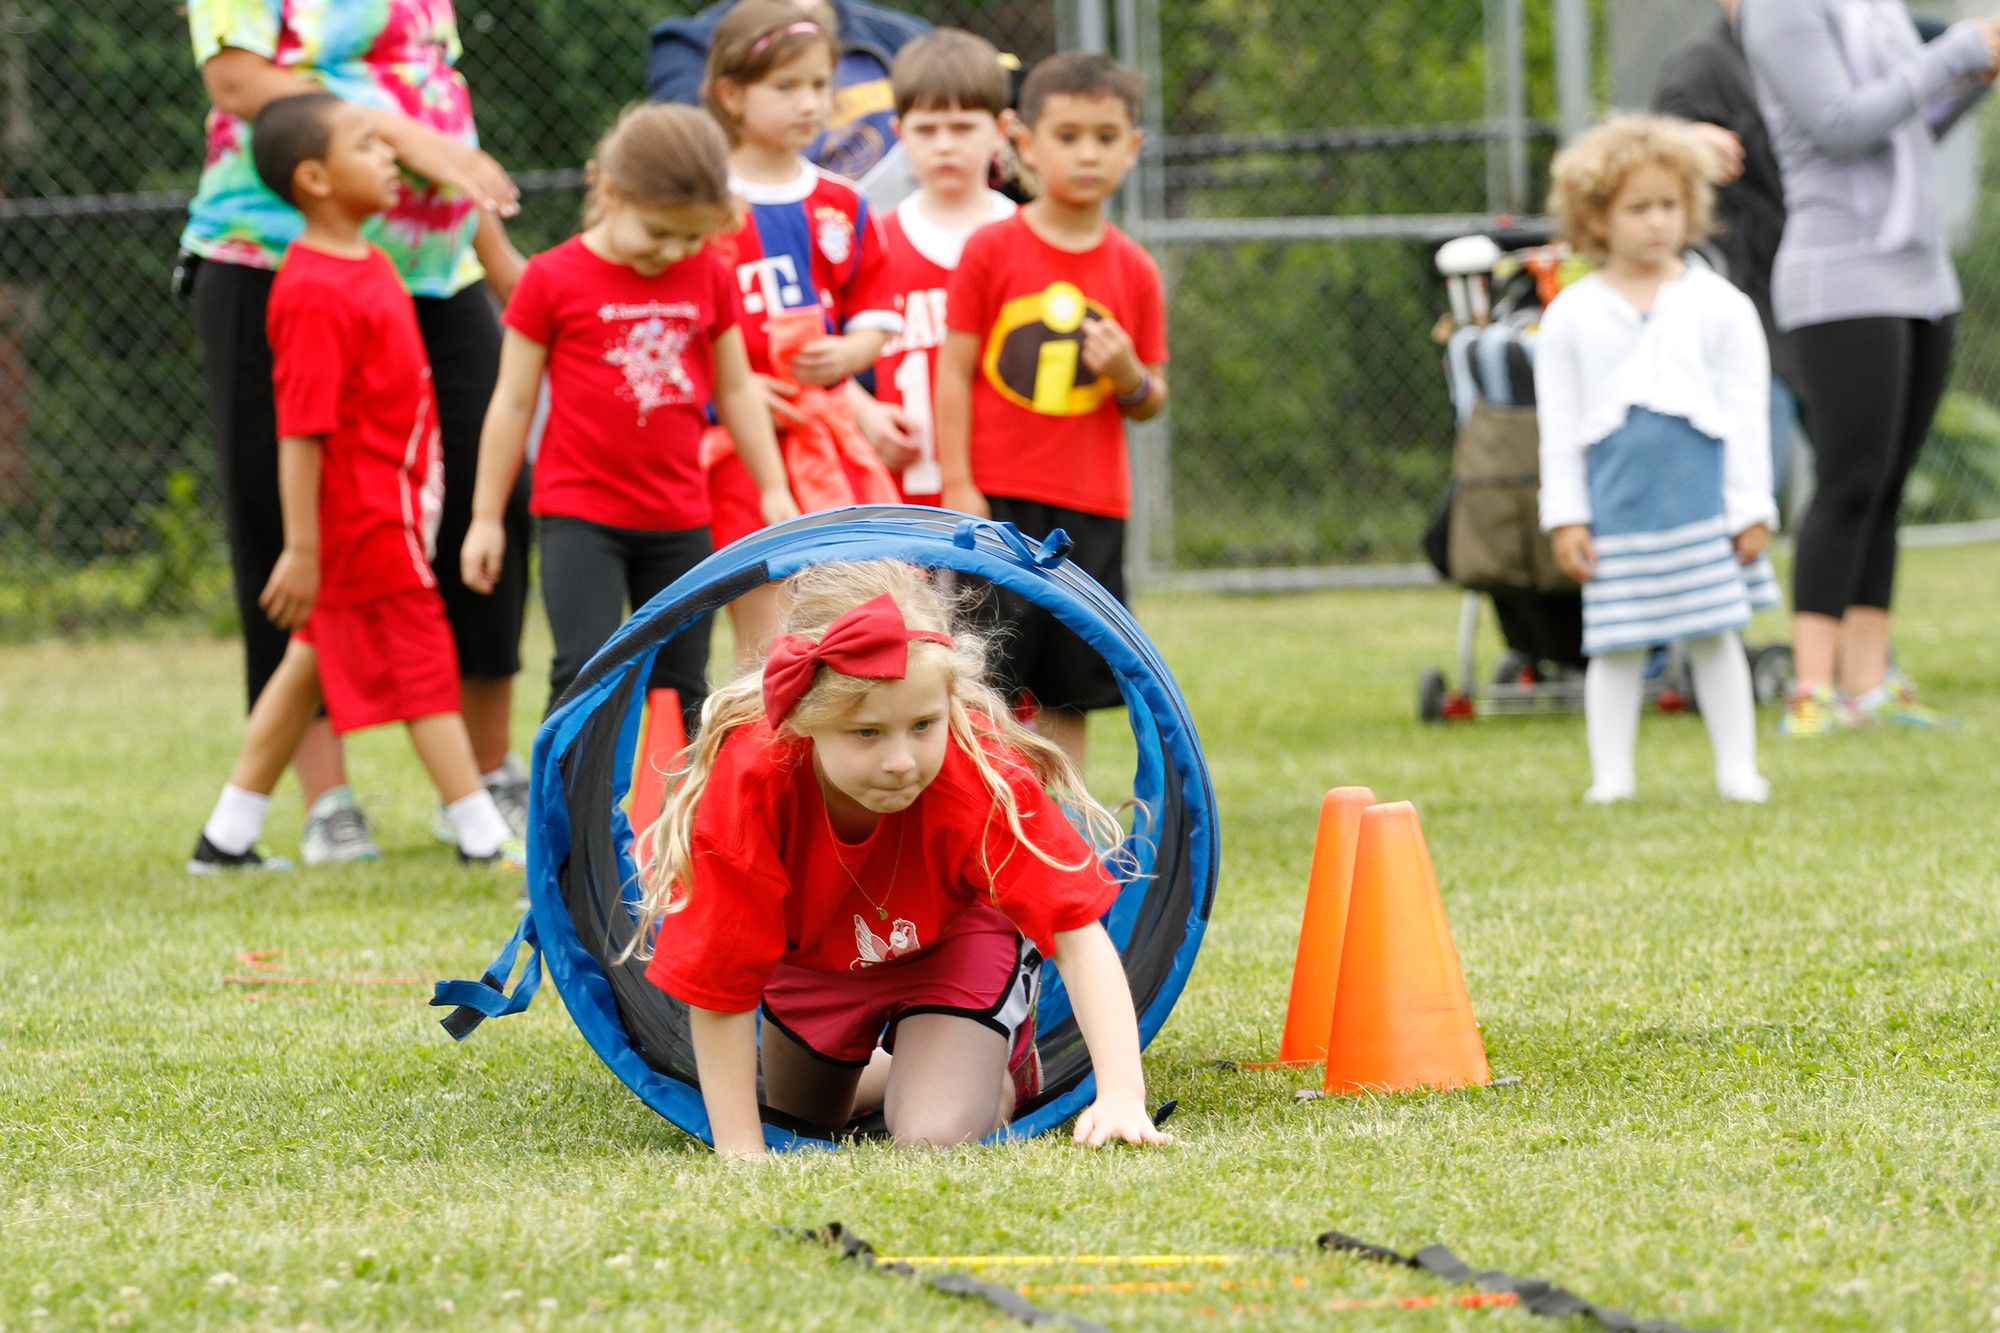 First grader Olivia Caracciolo raced through an obstacle course at Hewitt’s Field Day on June 5.